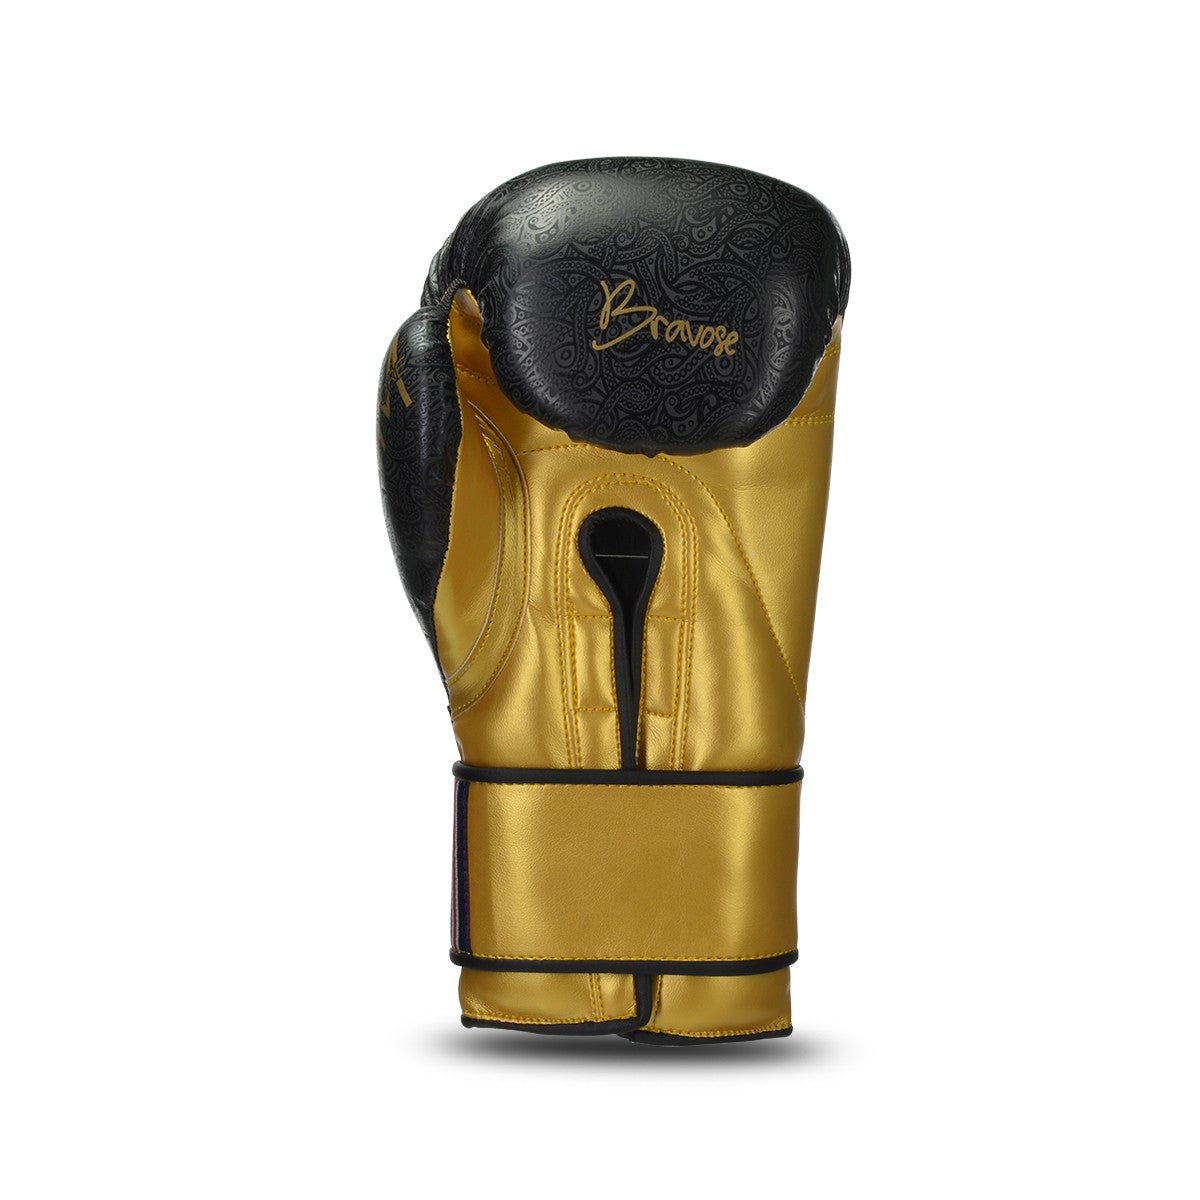 Nemesis Black and Gold Premium Quality Boxing Gloves for Bag and Sparring - Bravose